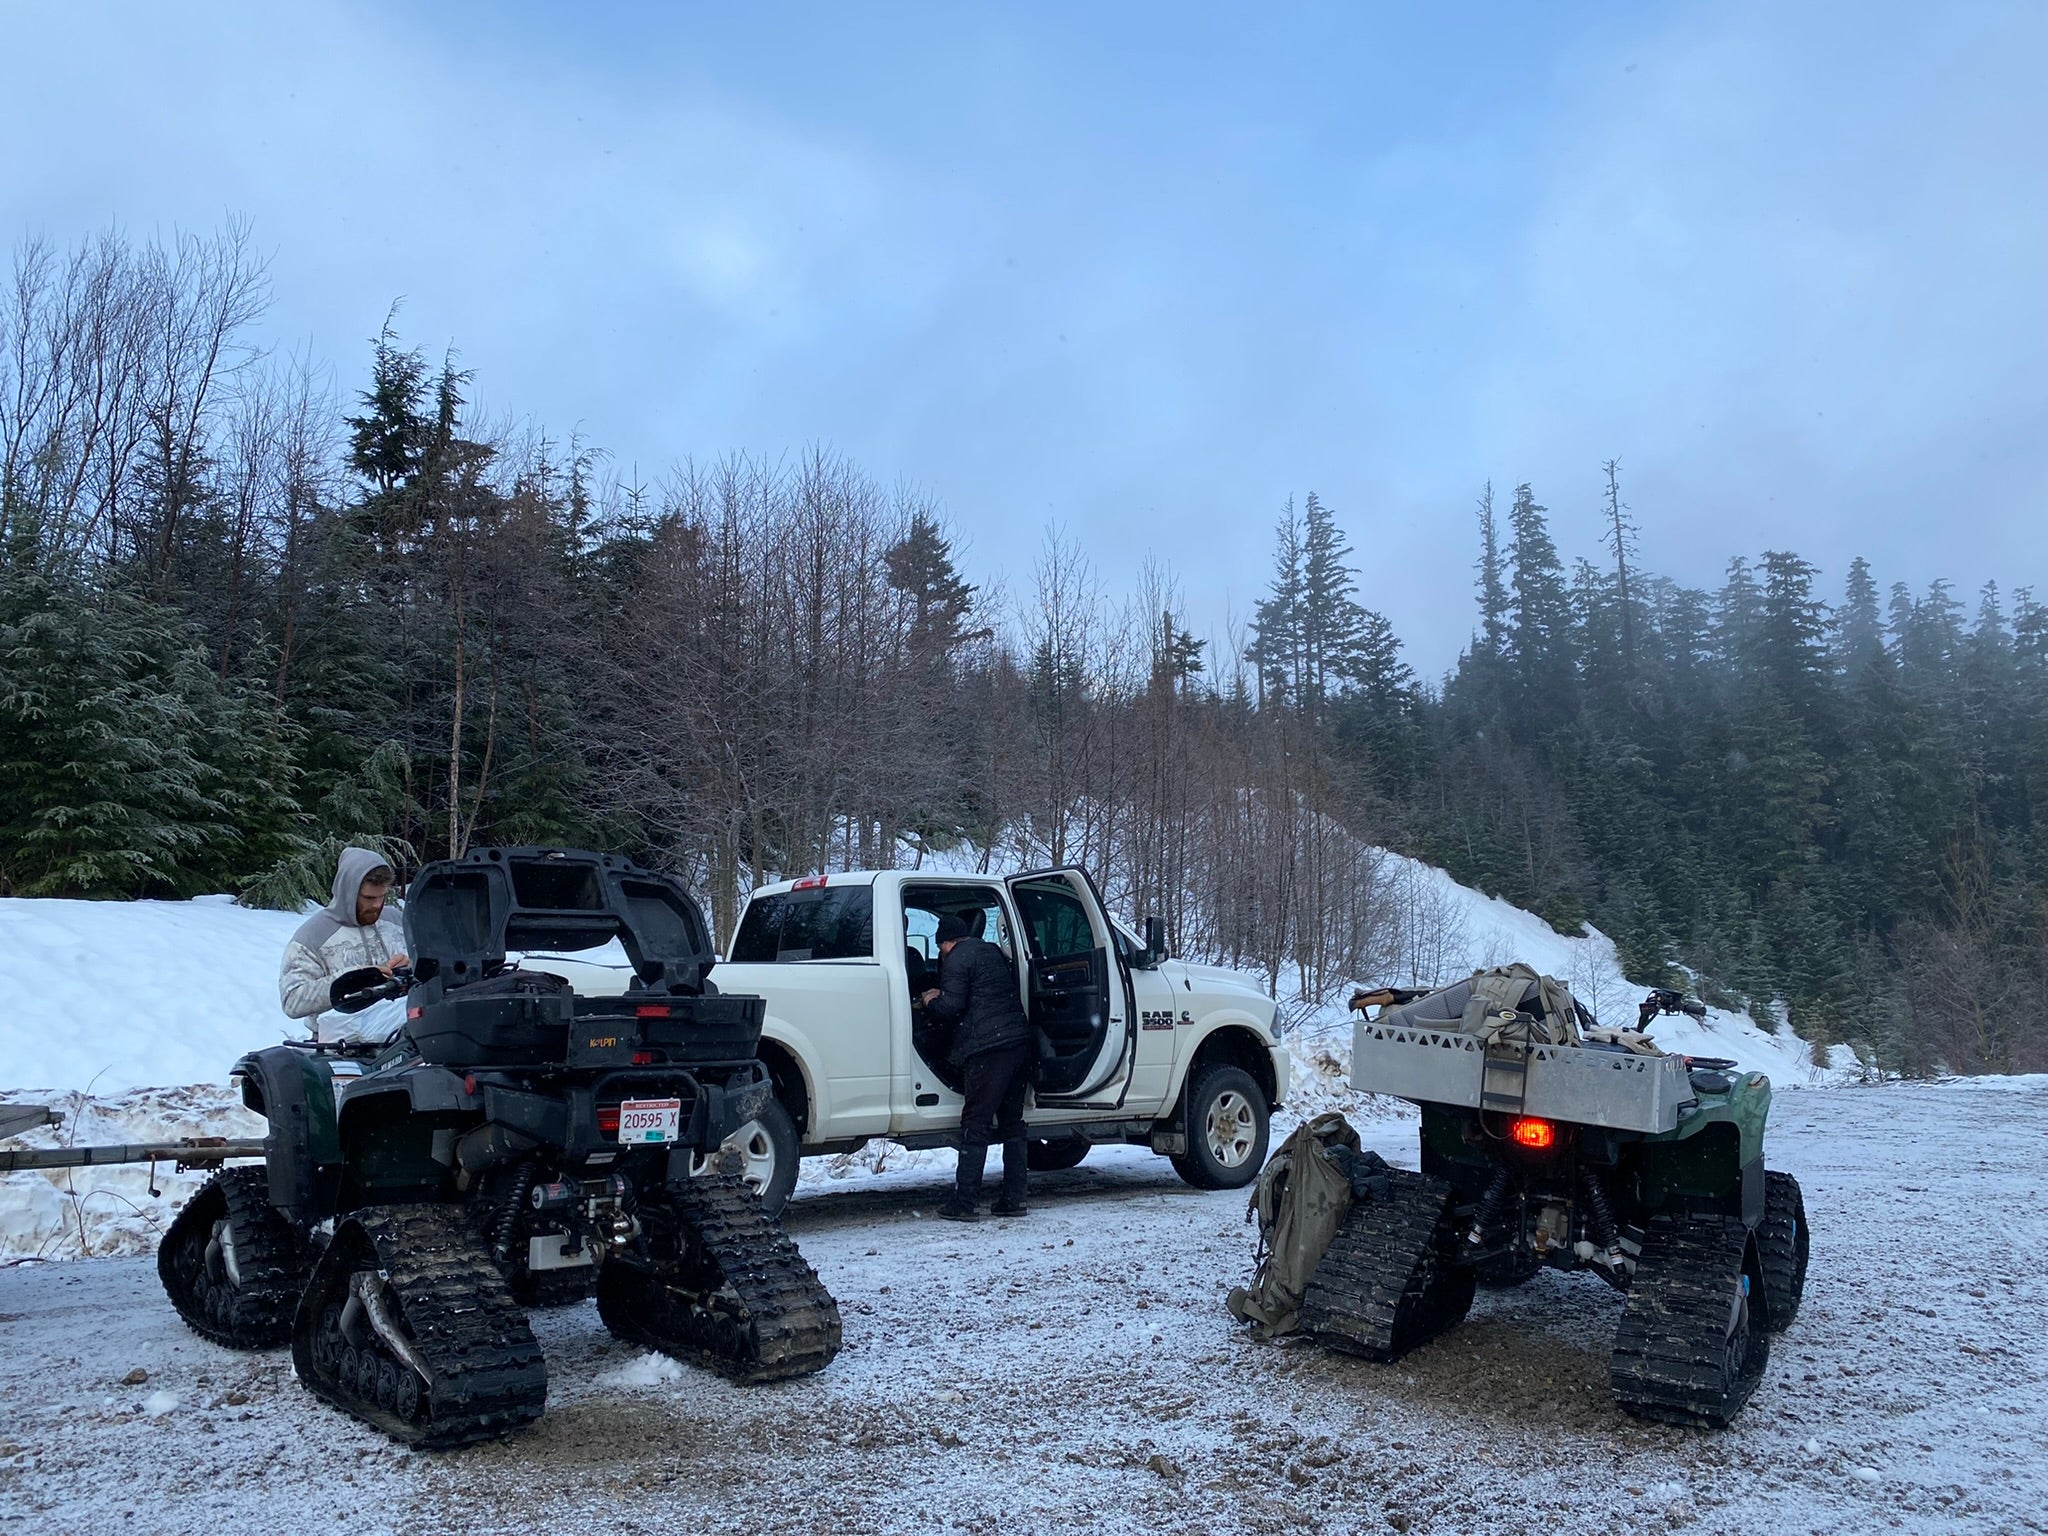 off-road vehicles for hunting mountain goats